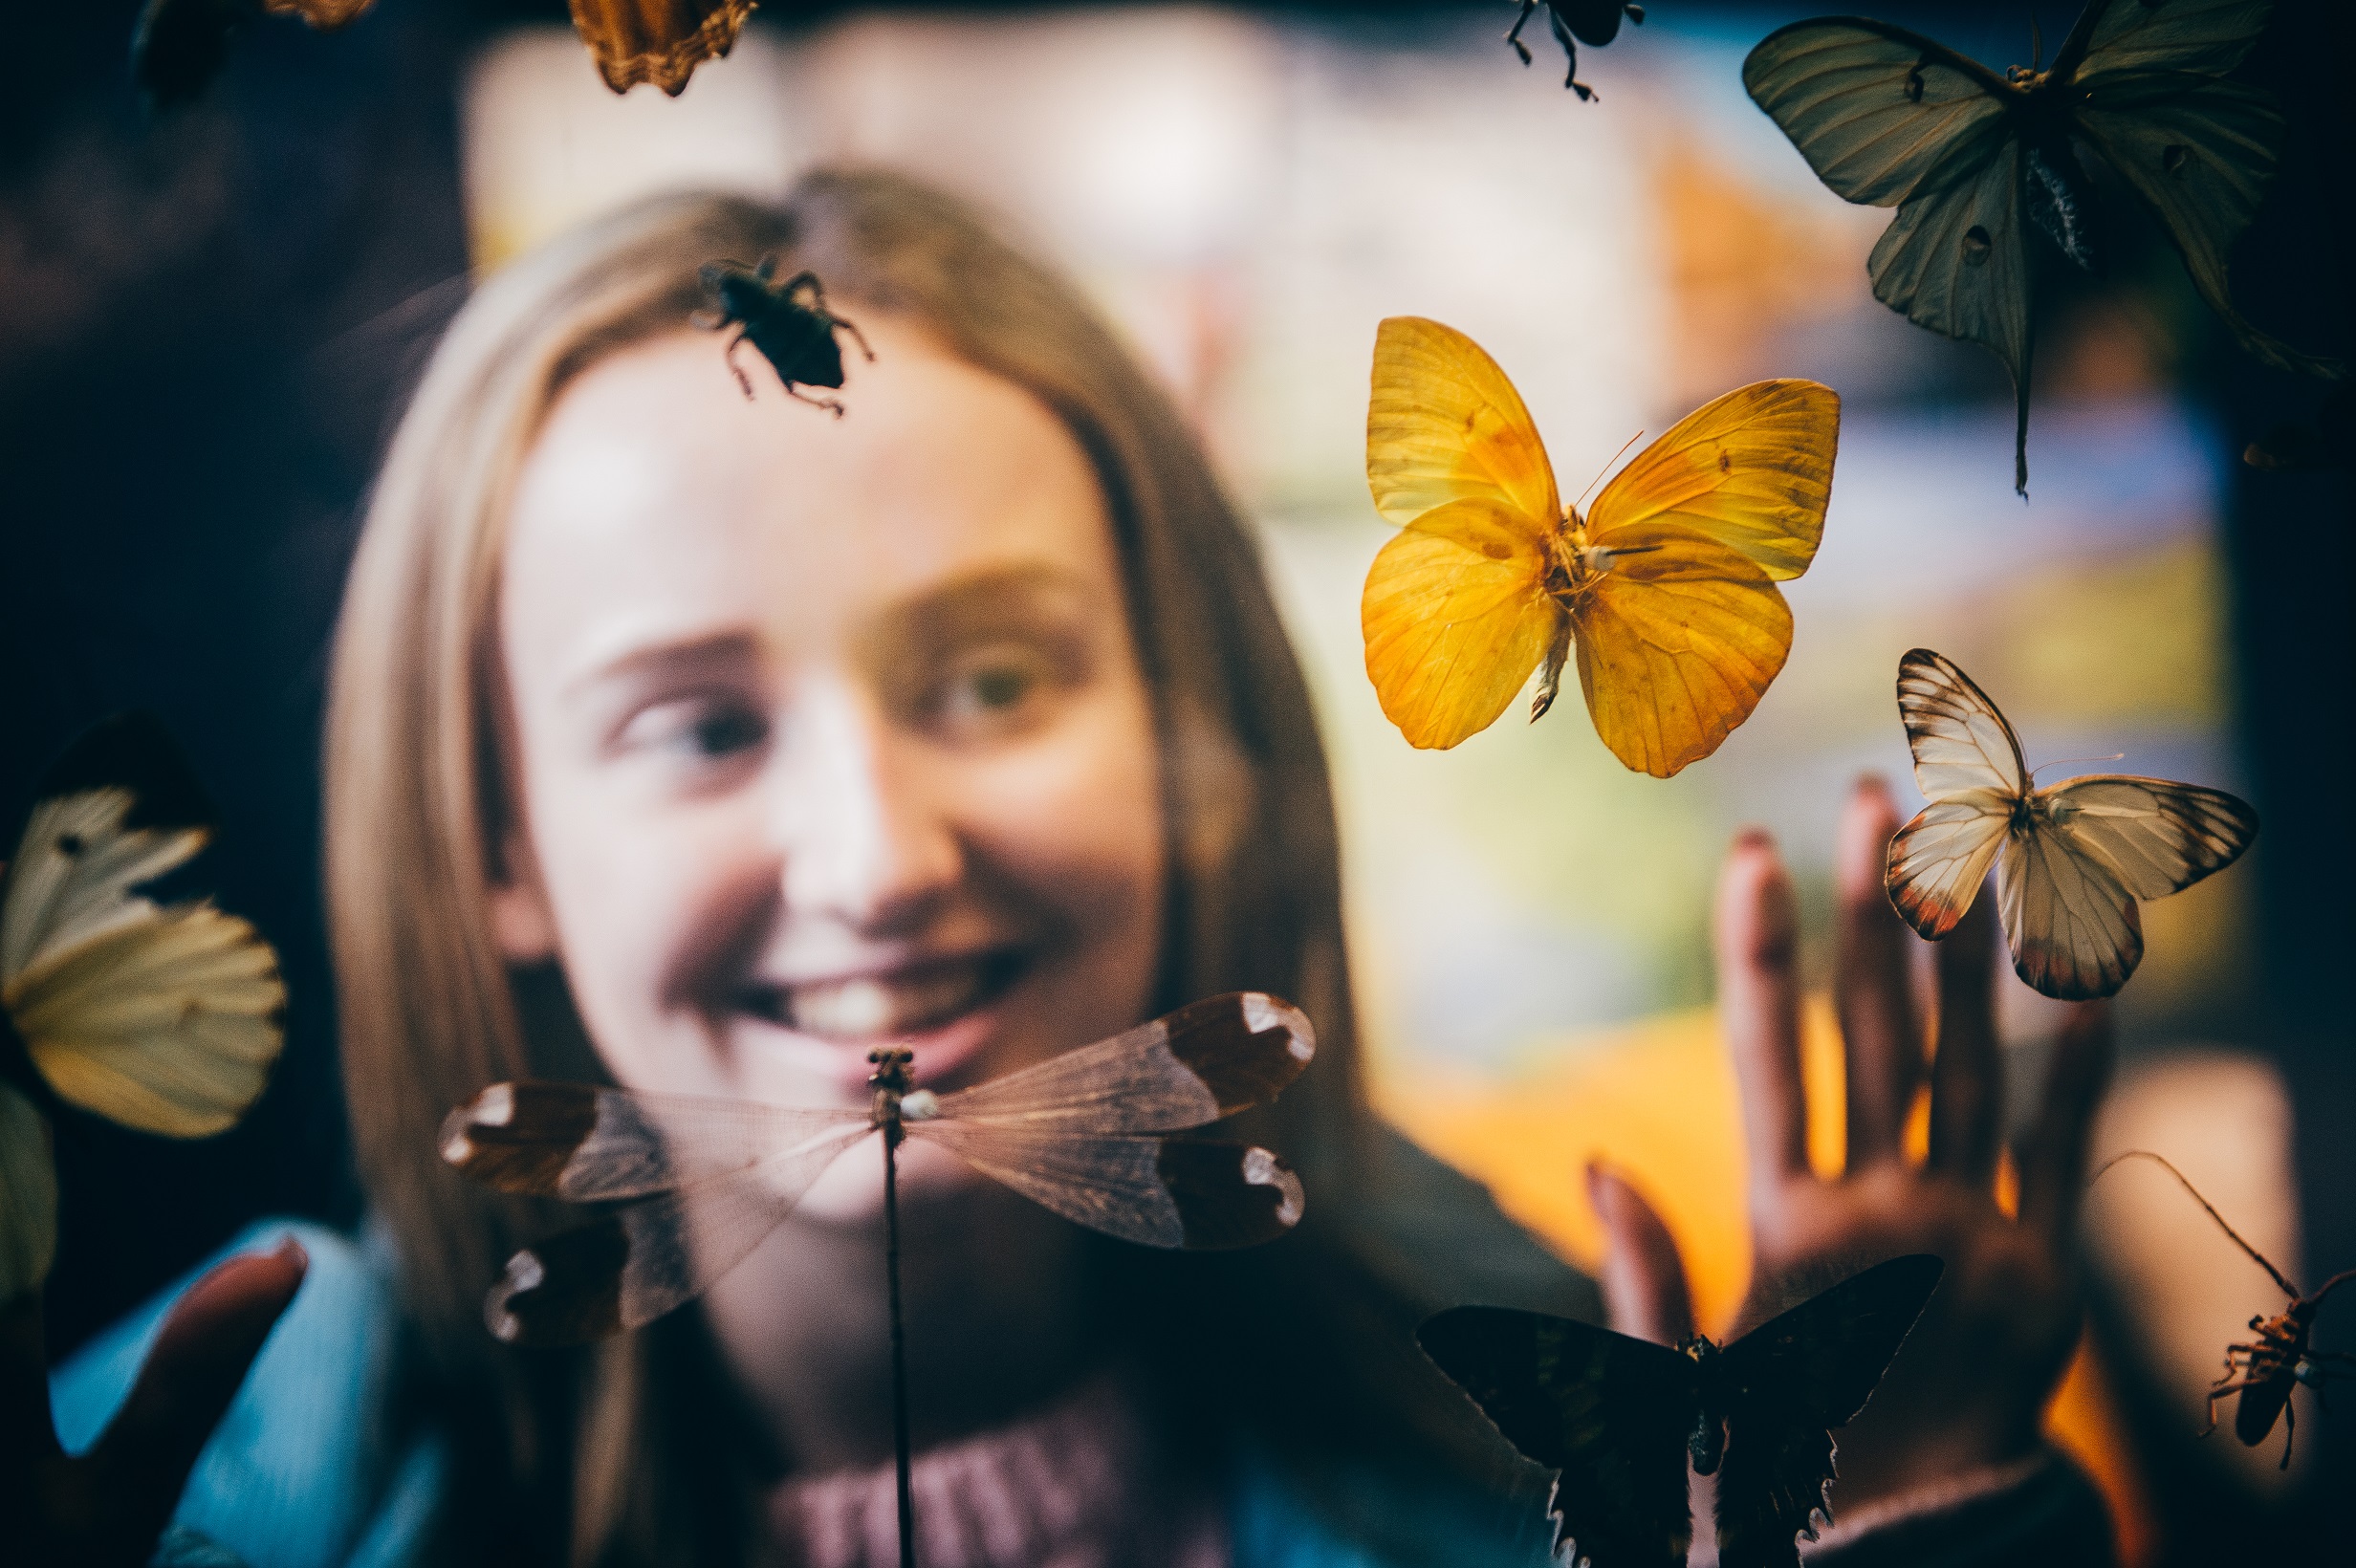 A young woman admires a display of butterflies